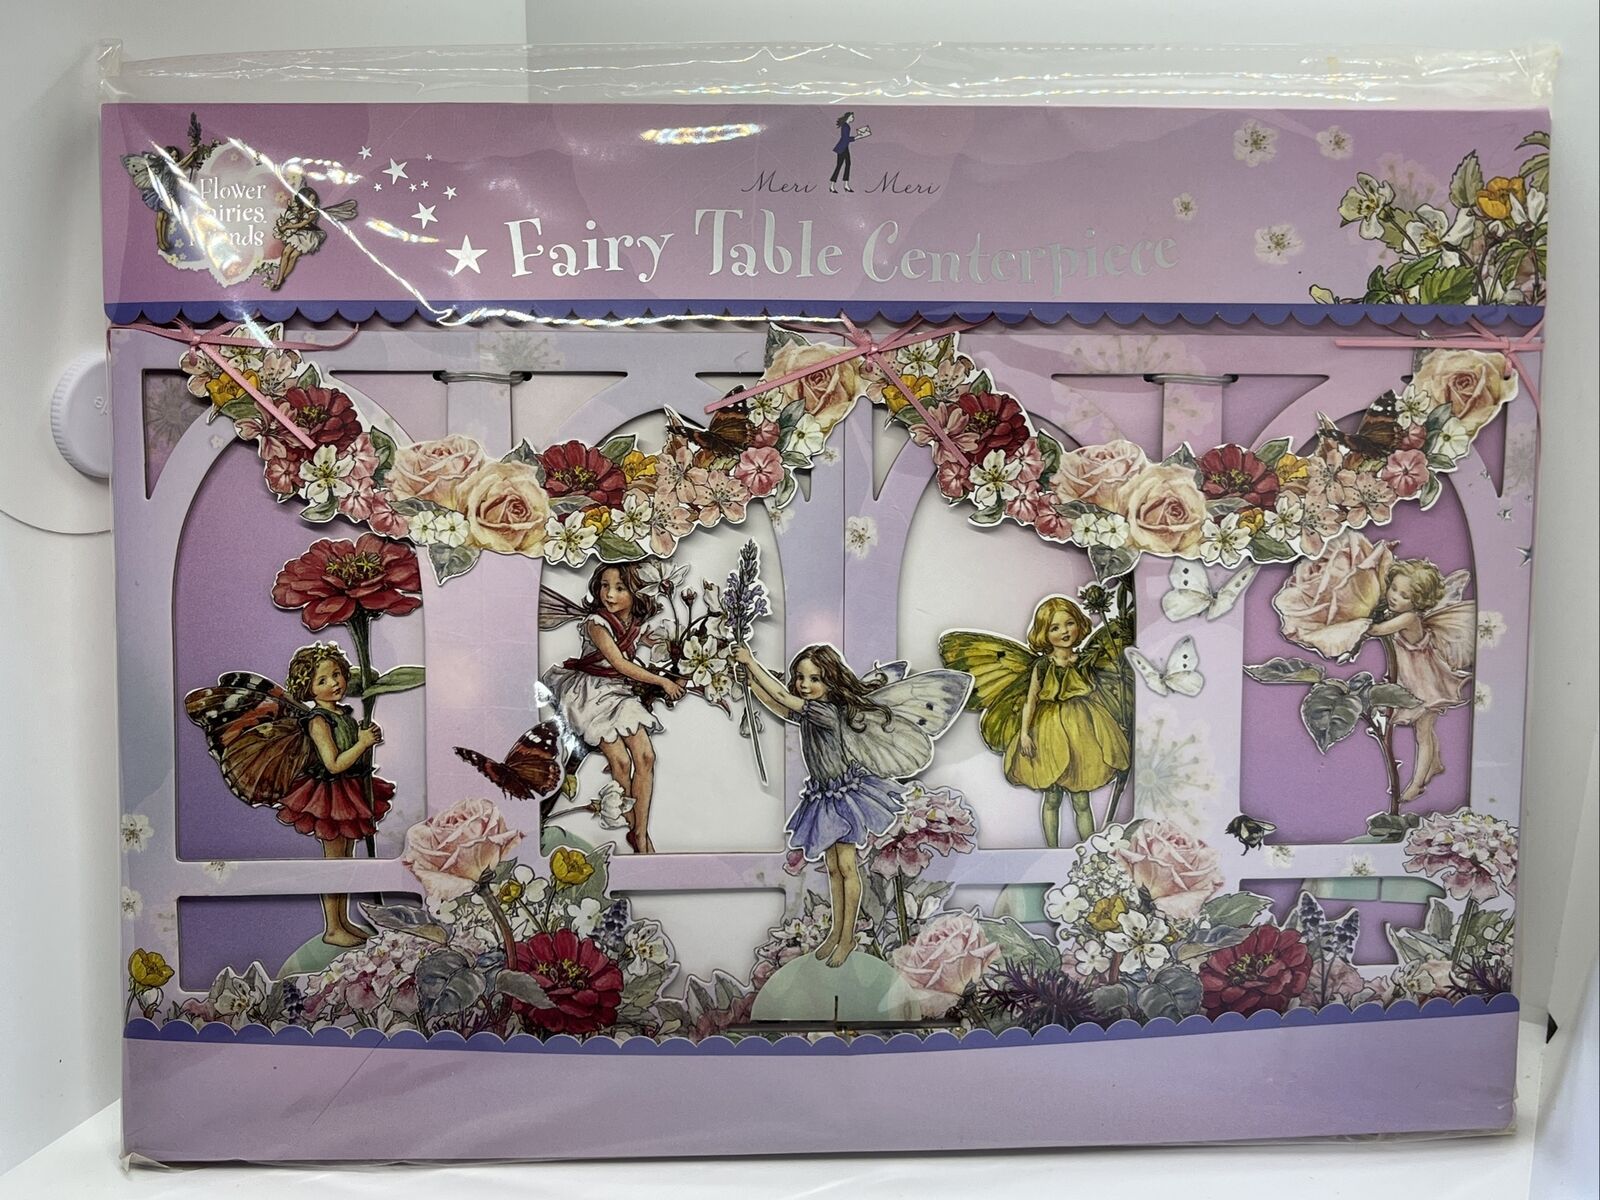 Flower Fairies Friends Fairy Table Centerpiece Easy To Assemble England 2010 NEW